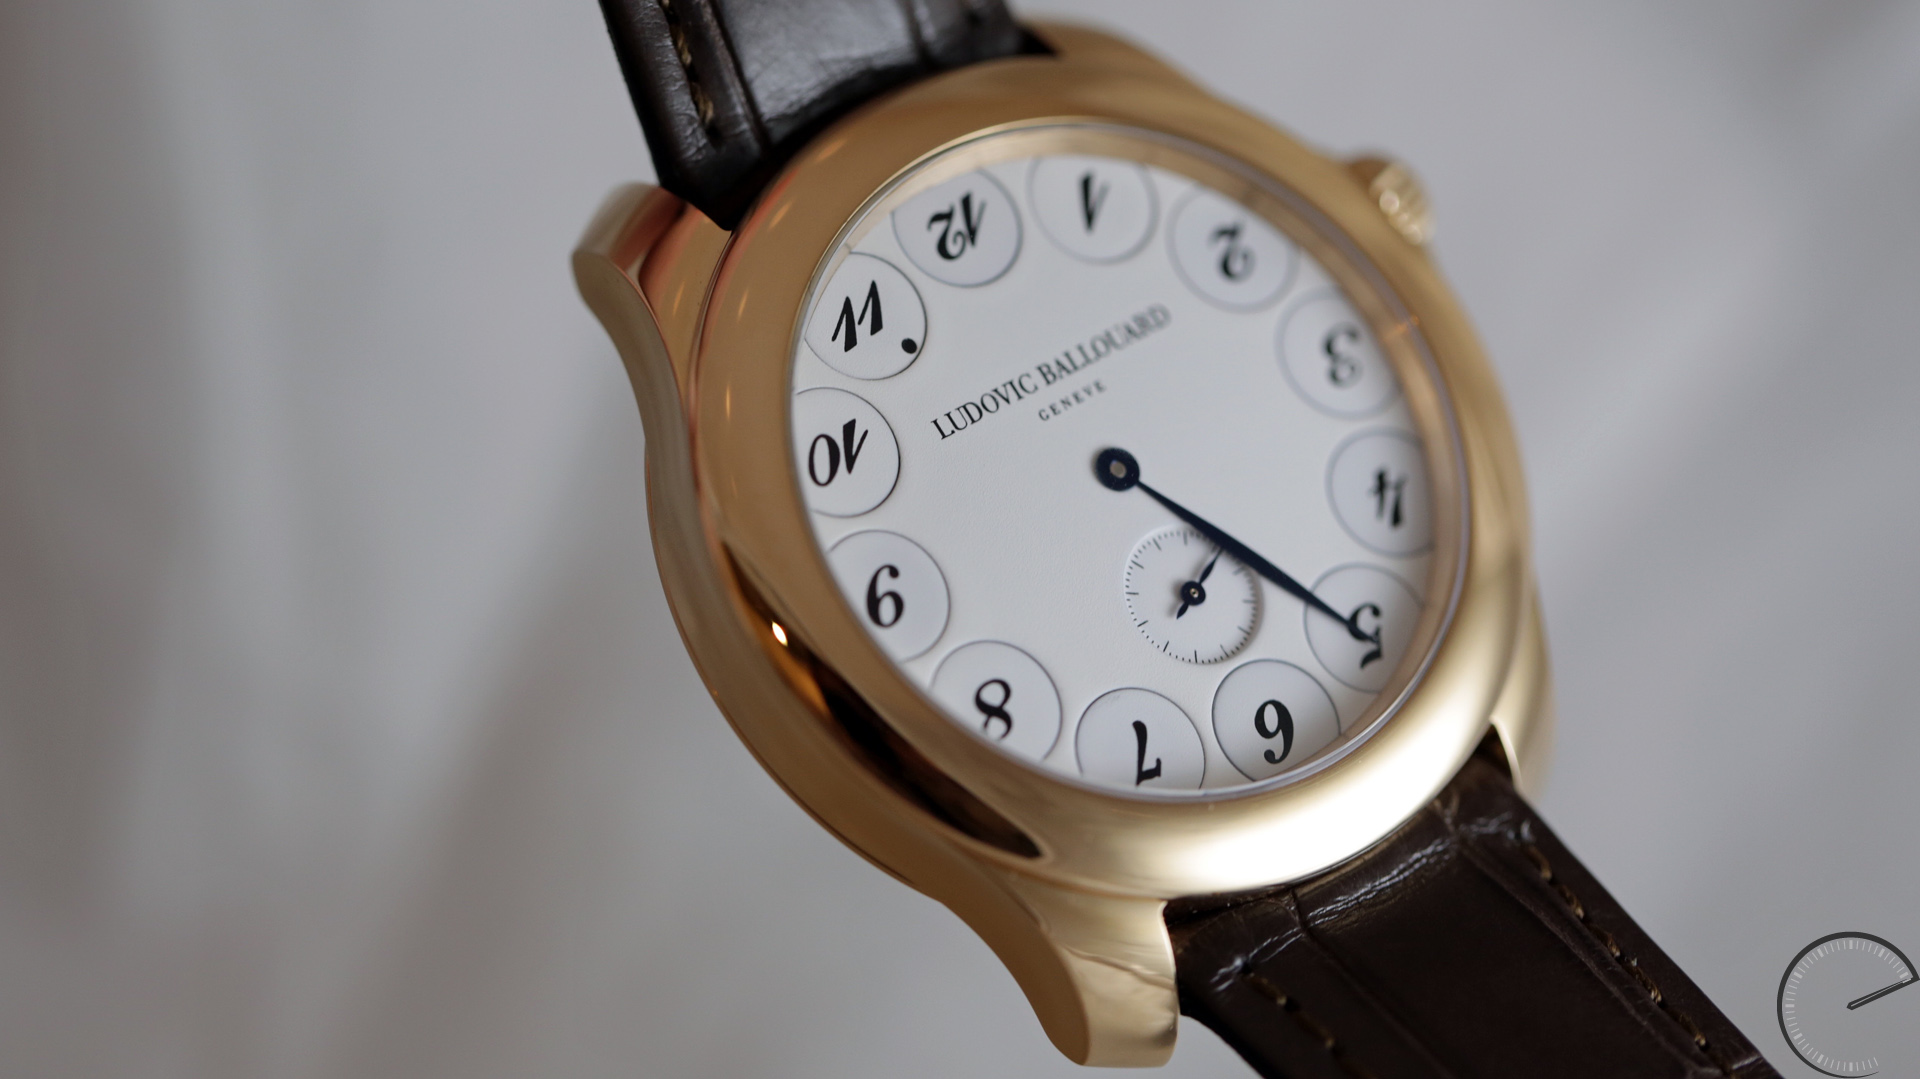 Ludovic Ballouard Upside Down Blanche in 18-carat red gold - watch replica review by Angus Davies, ESCAPEMENT blog